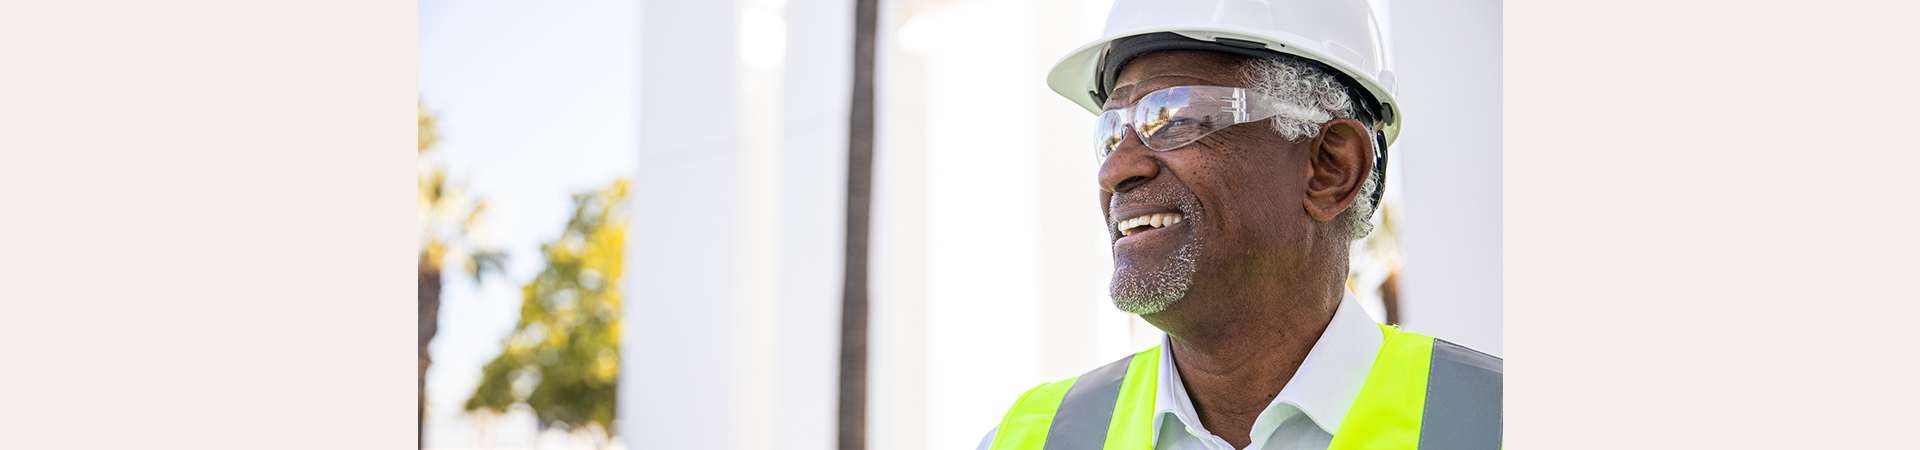 A man wearing safety equipment is smiling.